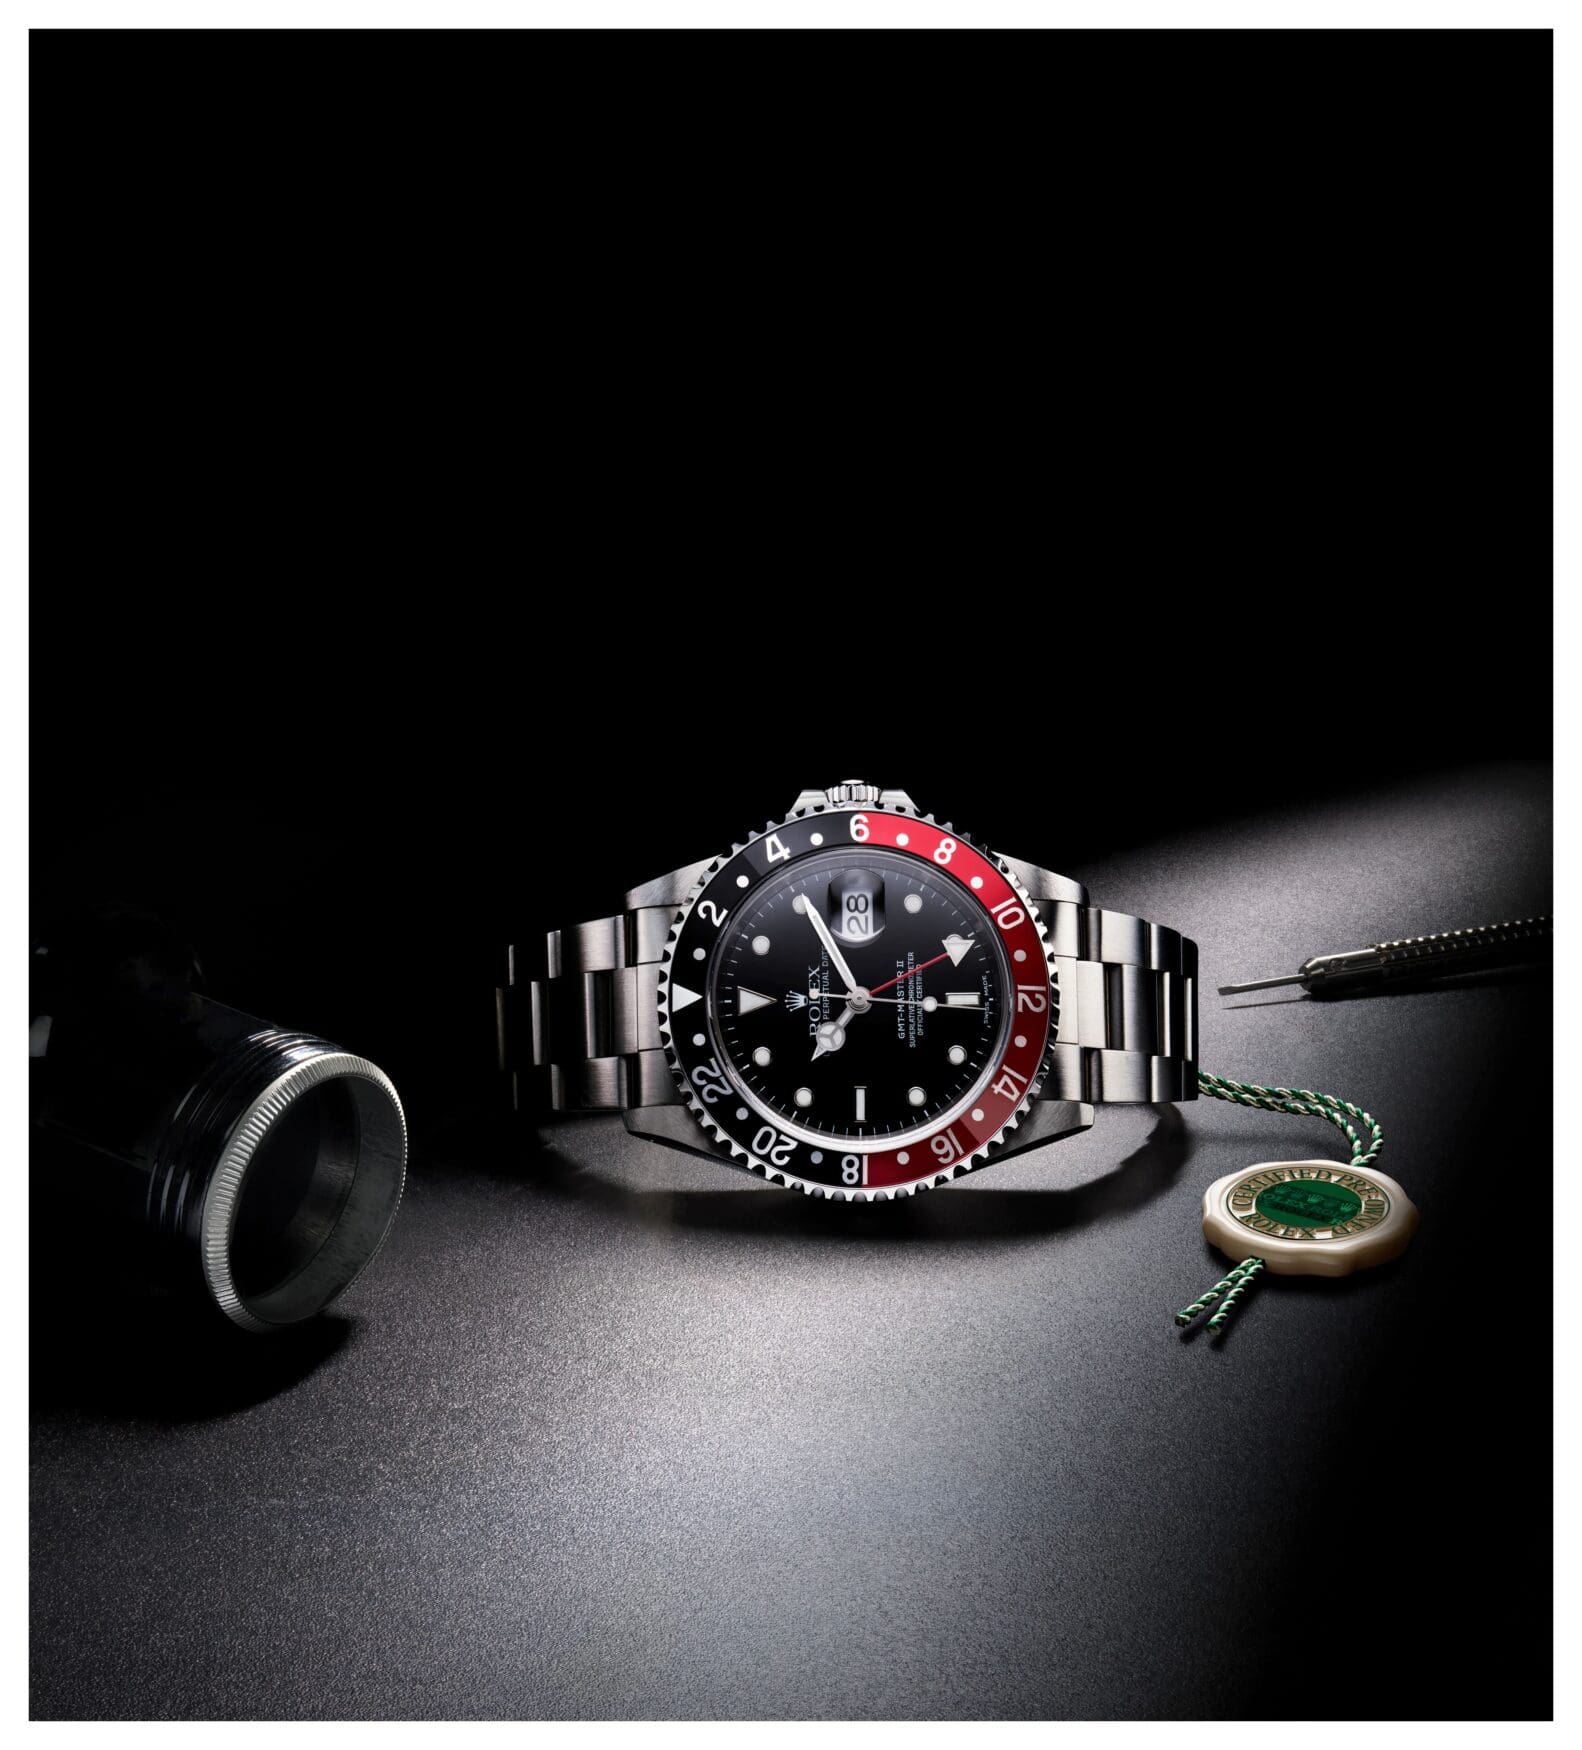 Rolex launch certified pre-owned program, but we are left with more questions than answers